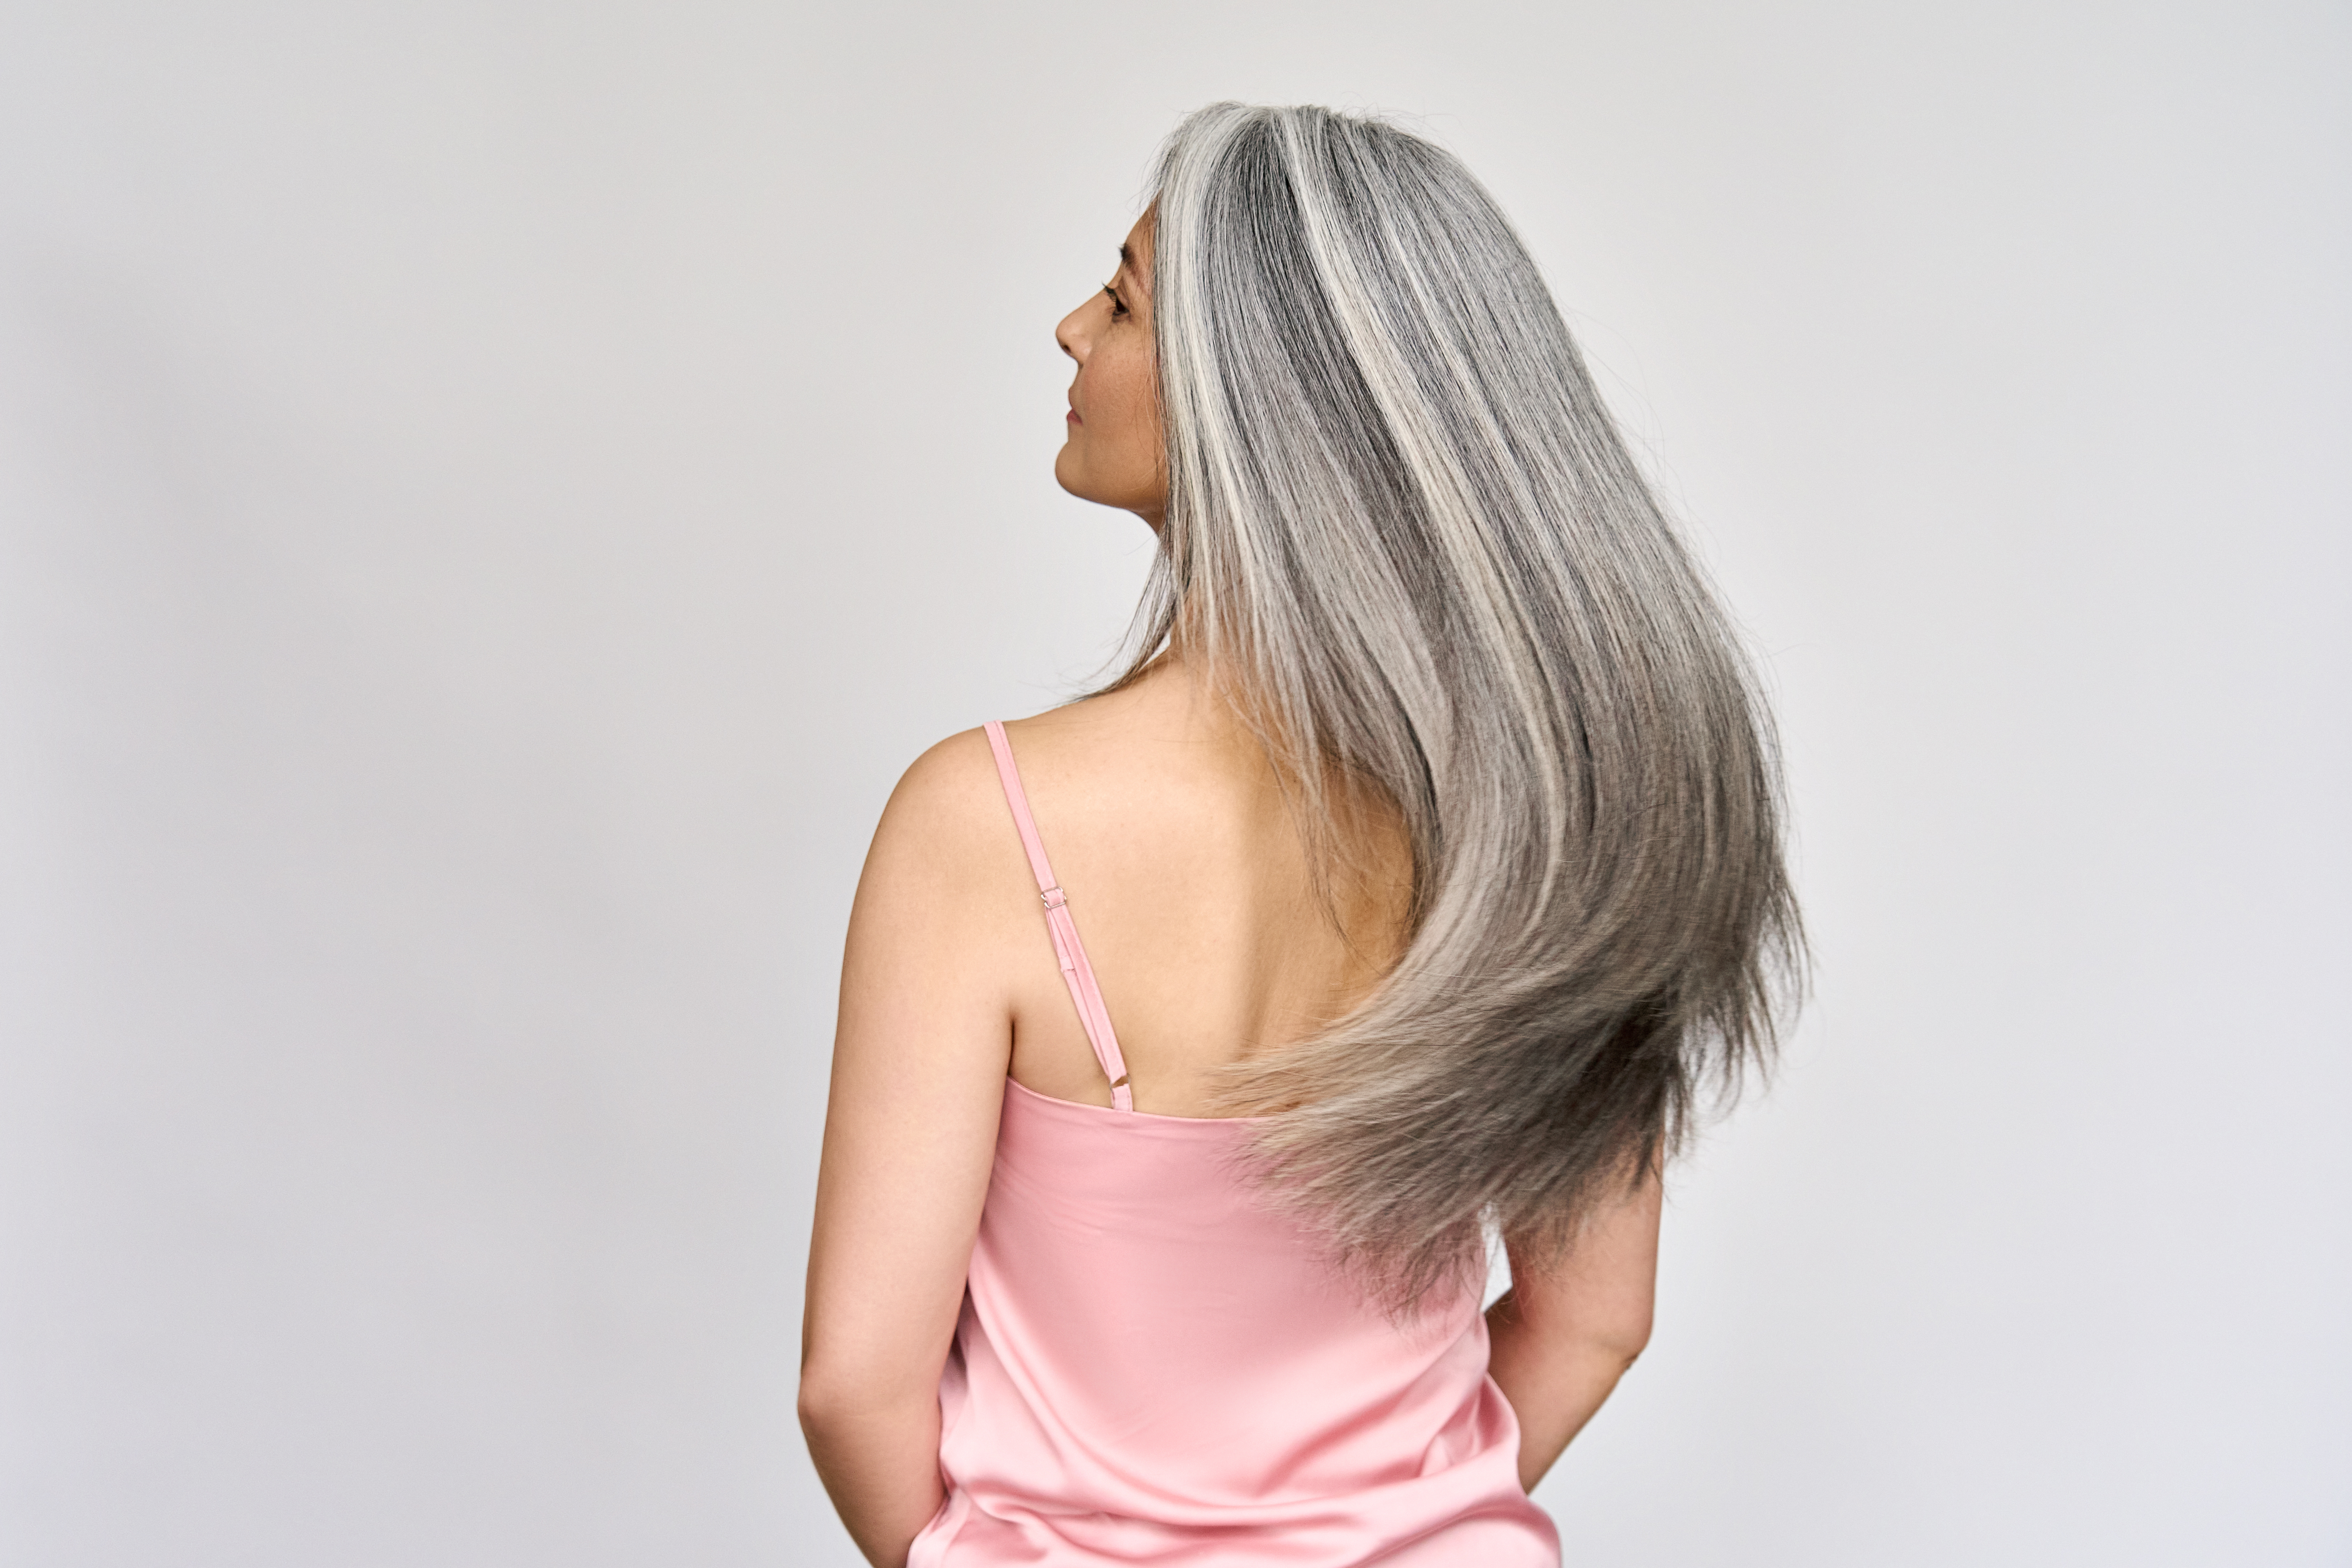 A woman with gray hair | Source: Shutterstock